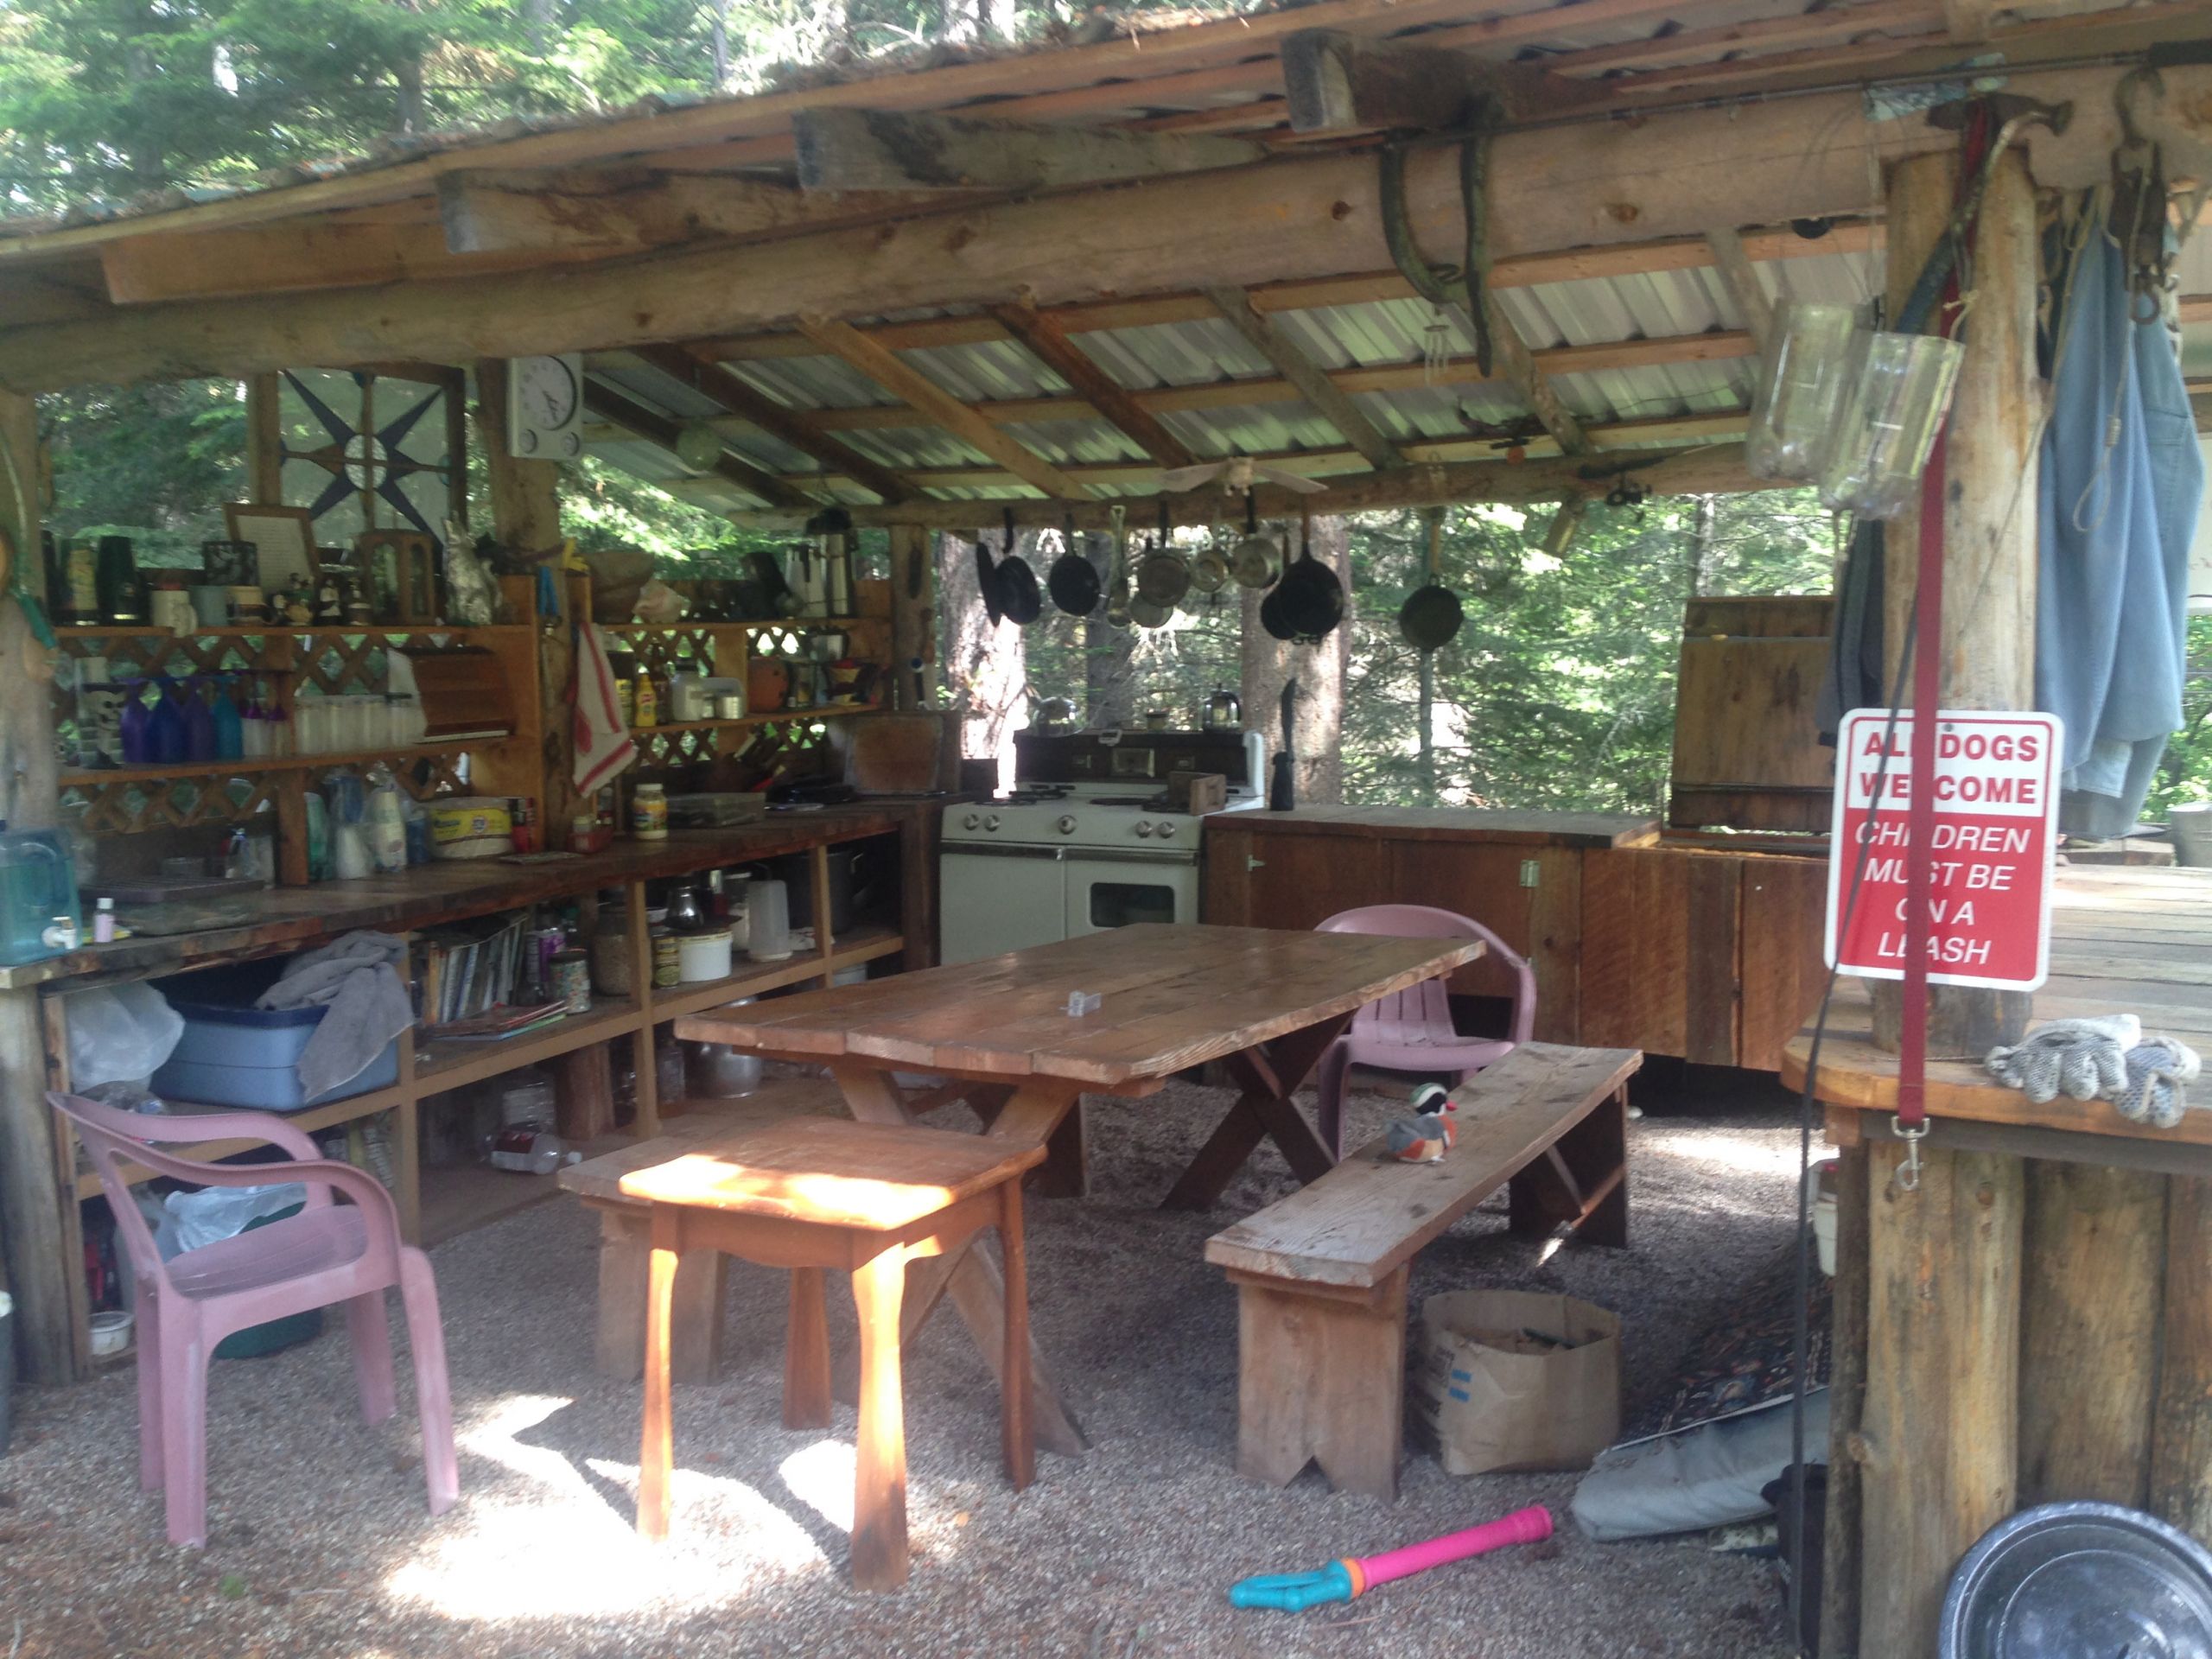 Outdoor Camp Kitchen Lovely July 2014 Of Outdoor Camp Kitchen Scaled 